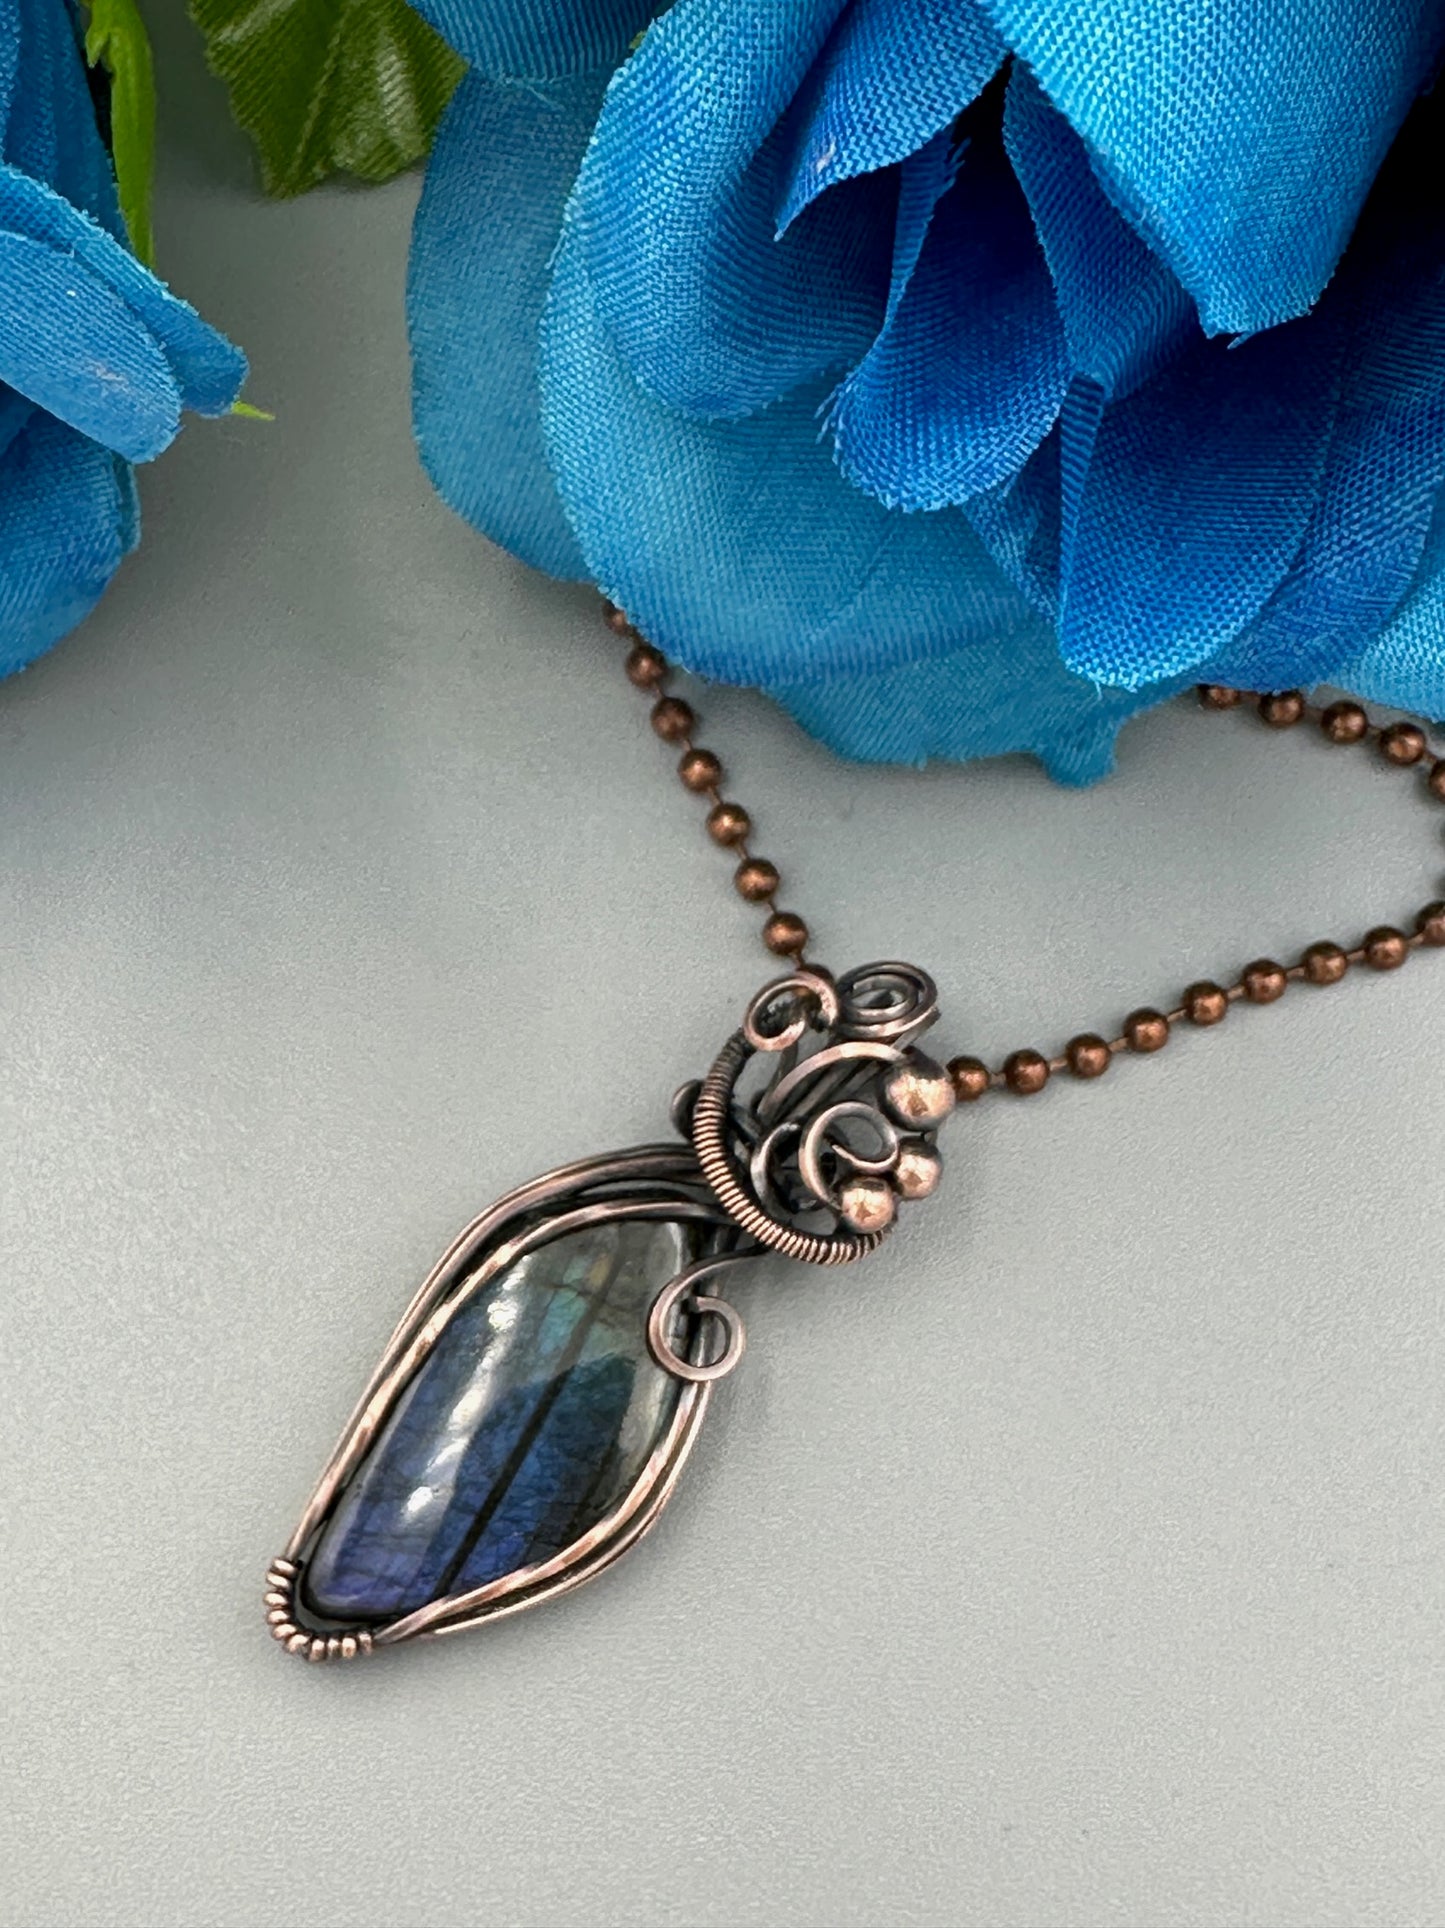 Handmade Wire Wrapped Curved Labradorite Pendant